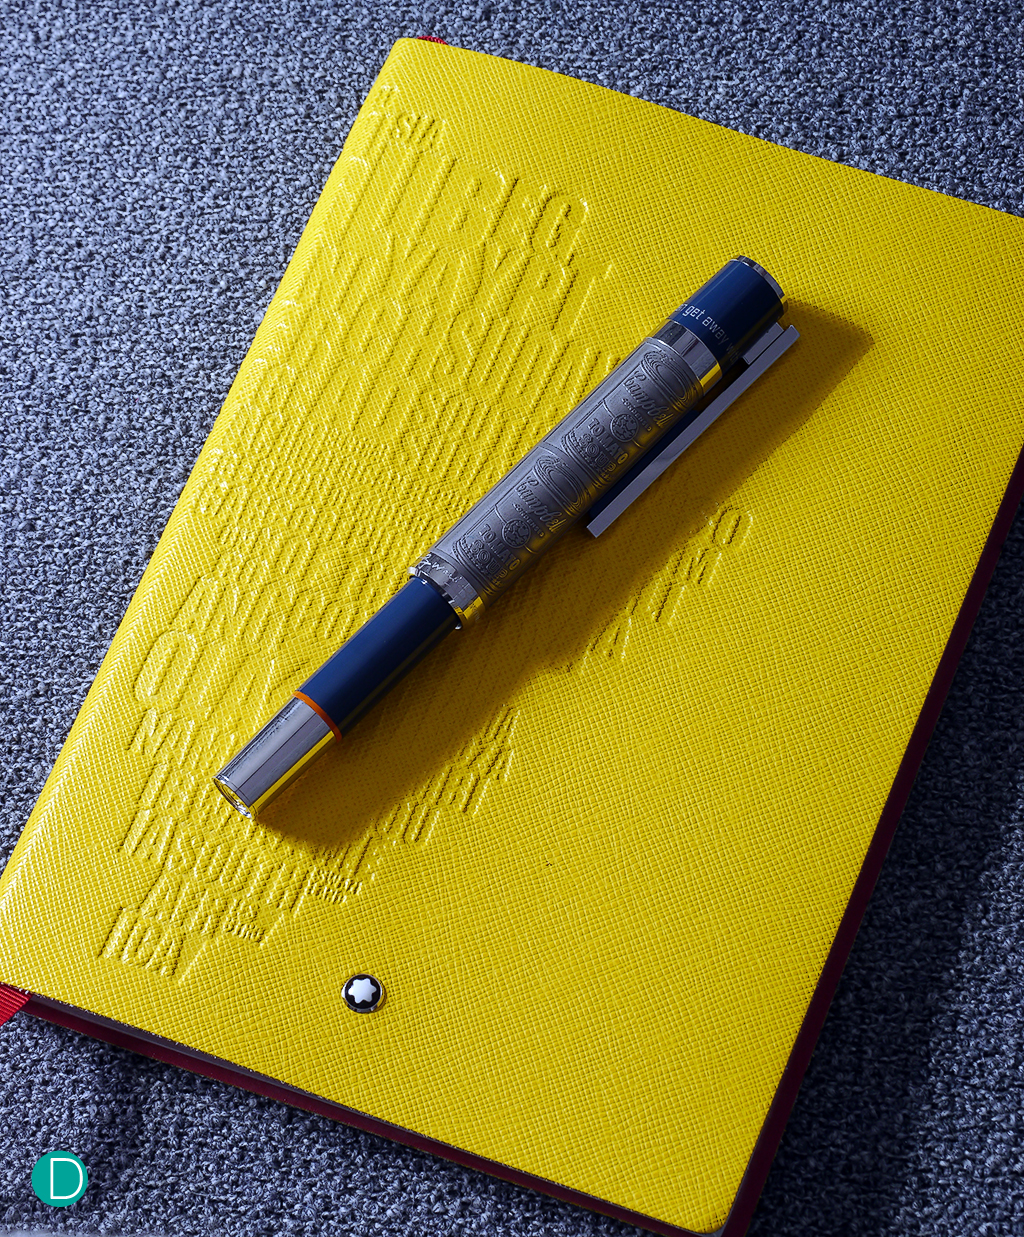 Jérôme Lambert's pen and writing book. The pen is manufactured in-house in Hamburg, Germany. And the paper and booklet is manufactured in-house in their facility in Florence.